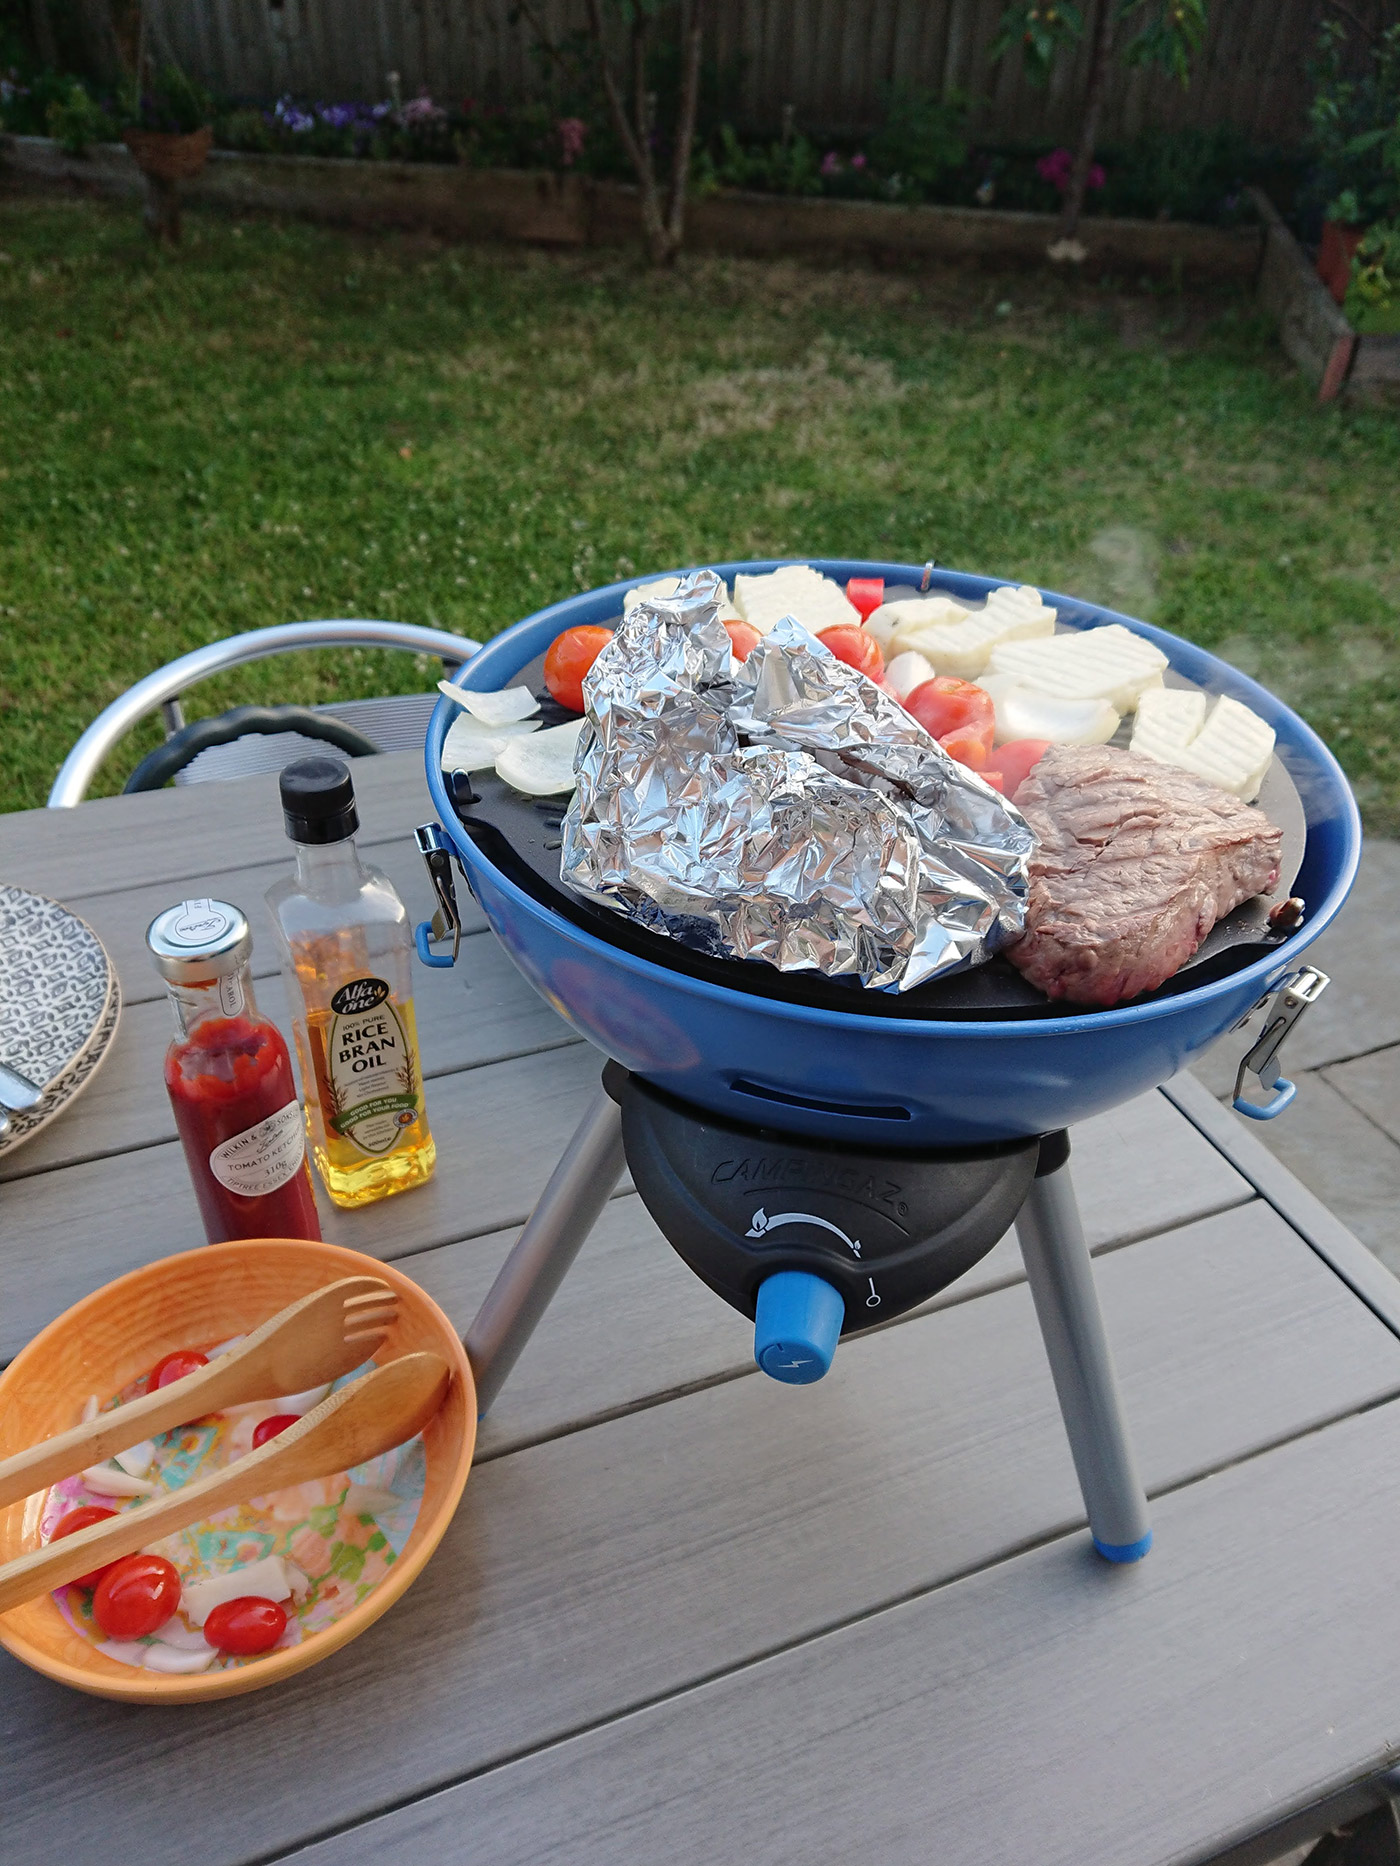 GEAR Putting The Campingaz Grill To The Test